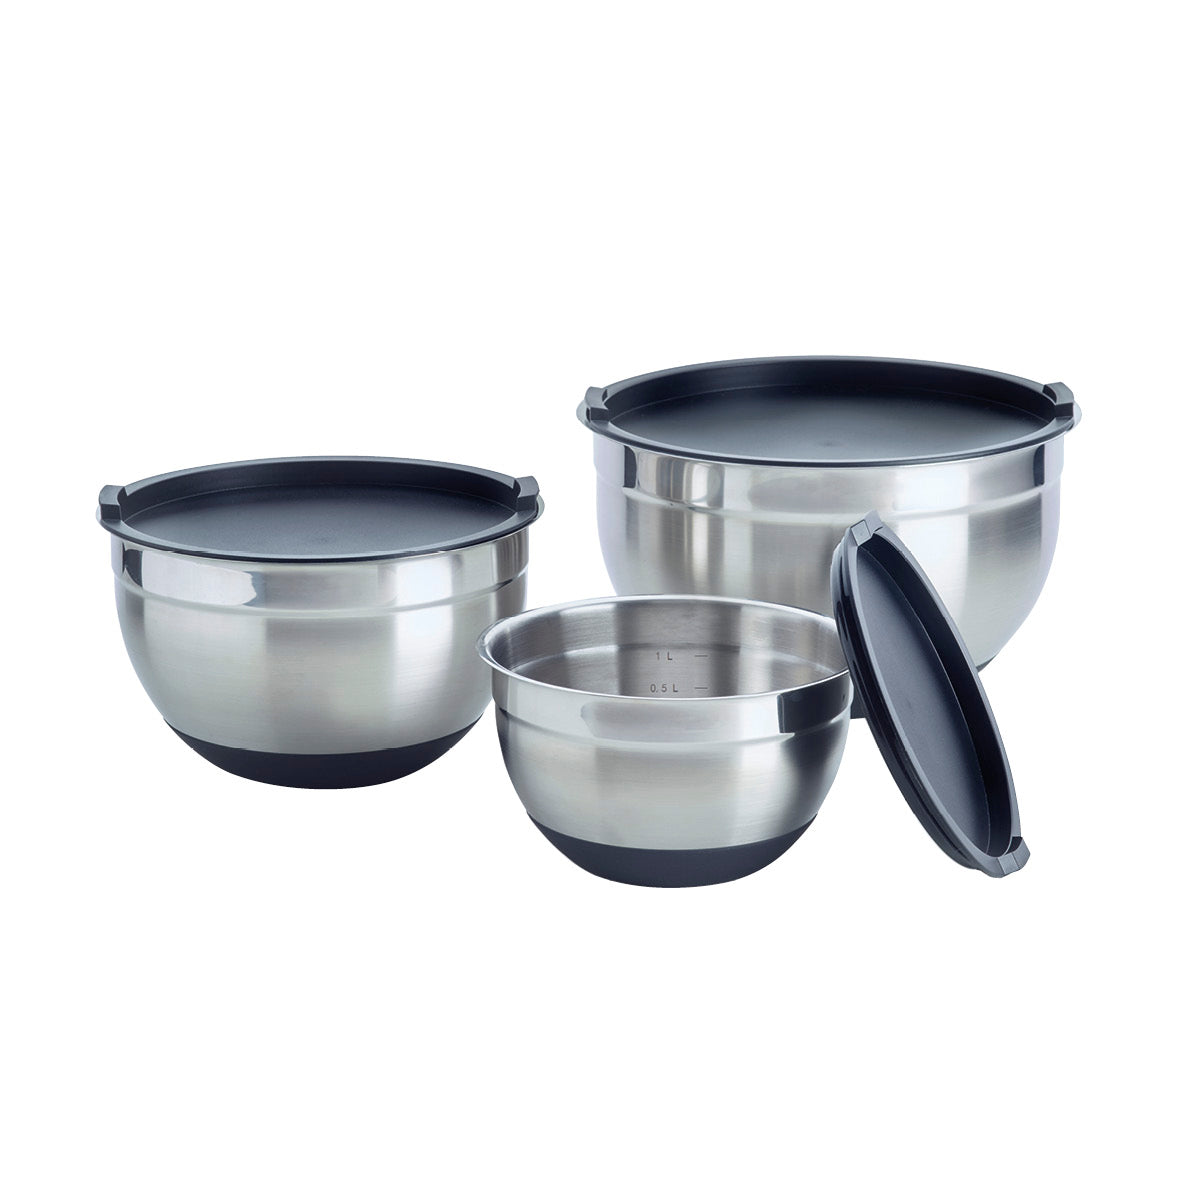 Set of 3 stainless steel mixing bowls with lid - Silver